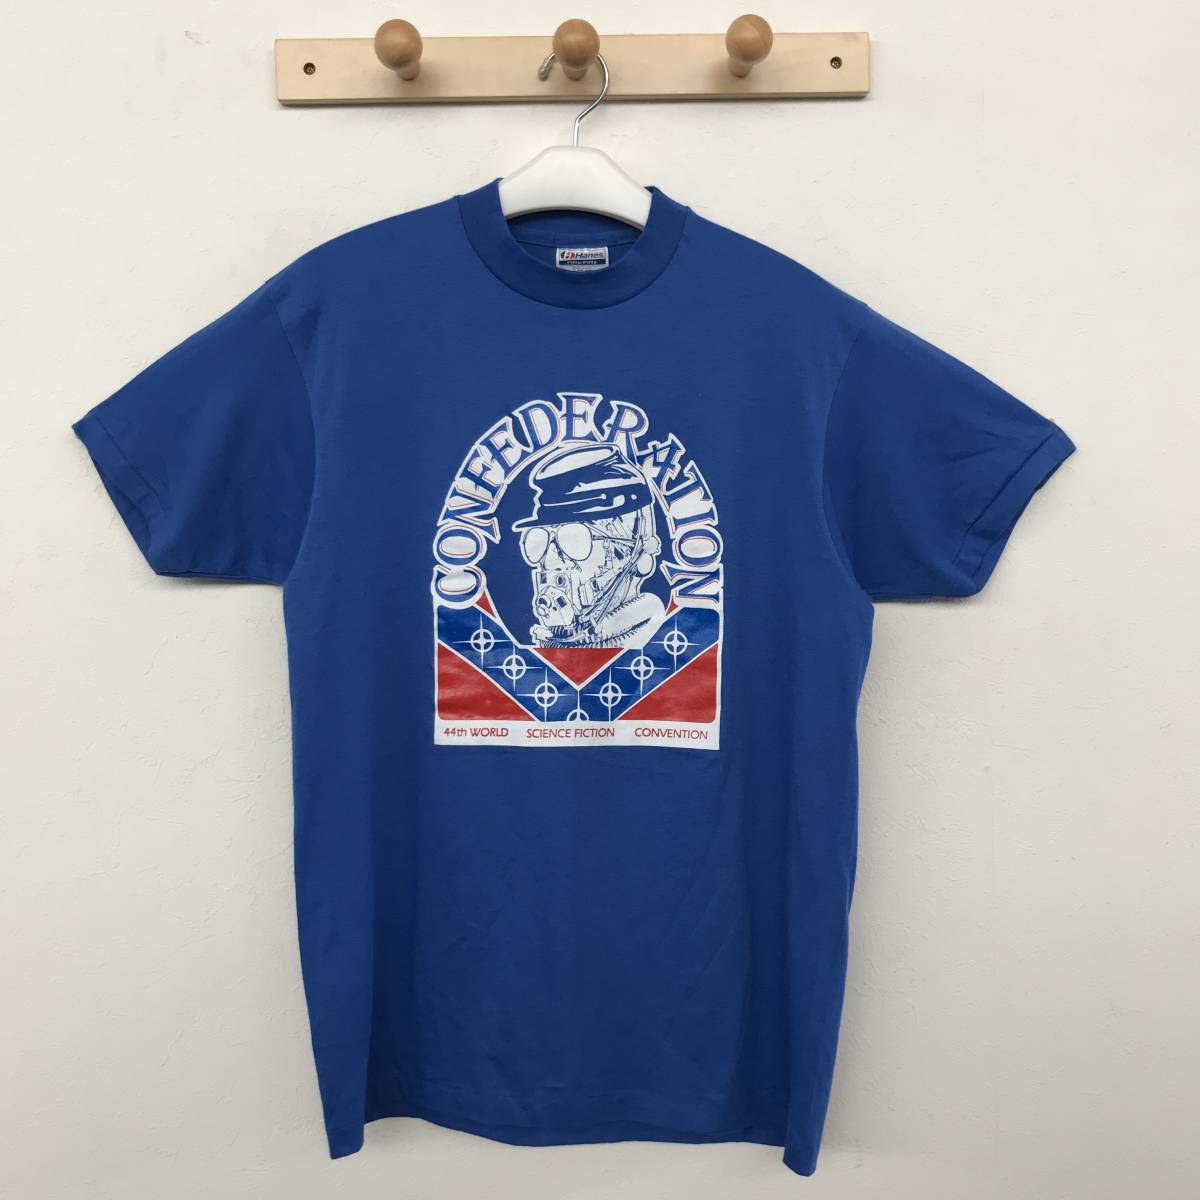 Hanes Fifty-Fifty 80's USA製 青タグ 1986年 第44回 世界SF大会 記念Tシャツ 美品(ほぼ未着用) size 42-44